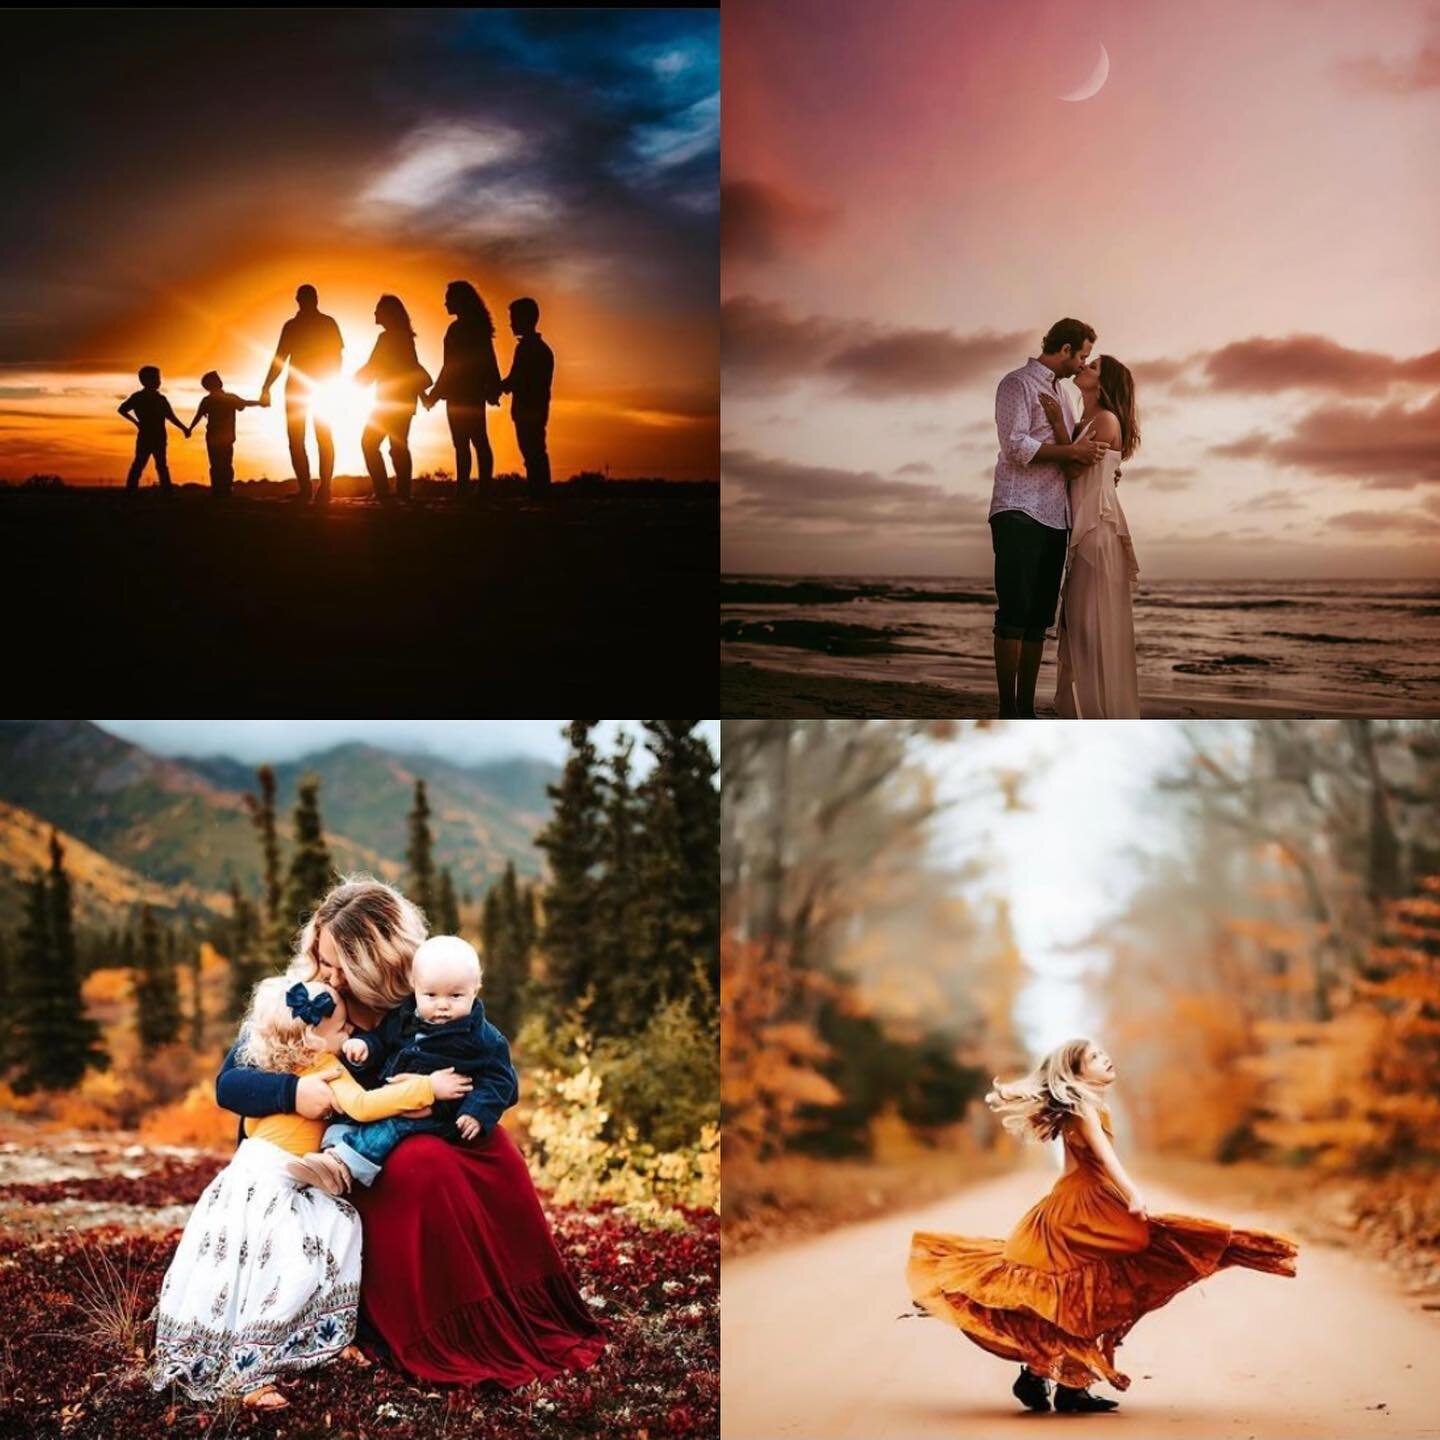 a little bit of color and a whole lotta talent to brighten your morning 🌈  if you aren&rsquo;t already following them, you&rsquo;re missing out!

TL: @ranchers_daughterphotography
TR: @droaphotography
BL: @stephbeguhlphoto
BR: @katrinakuzminerphotog